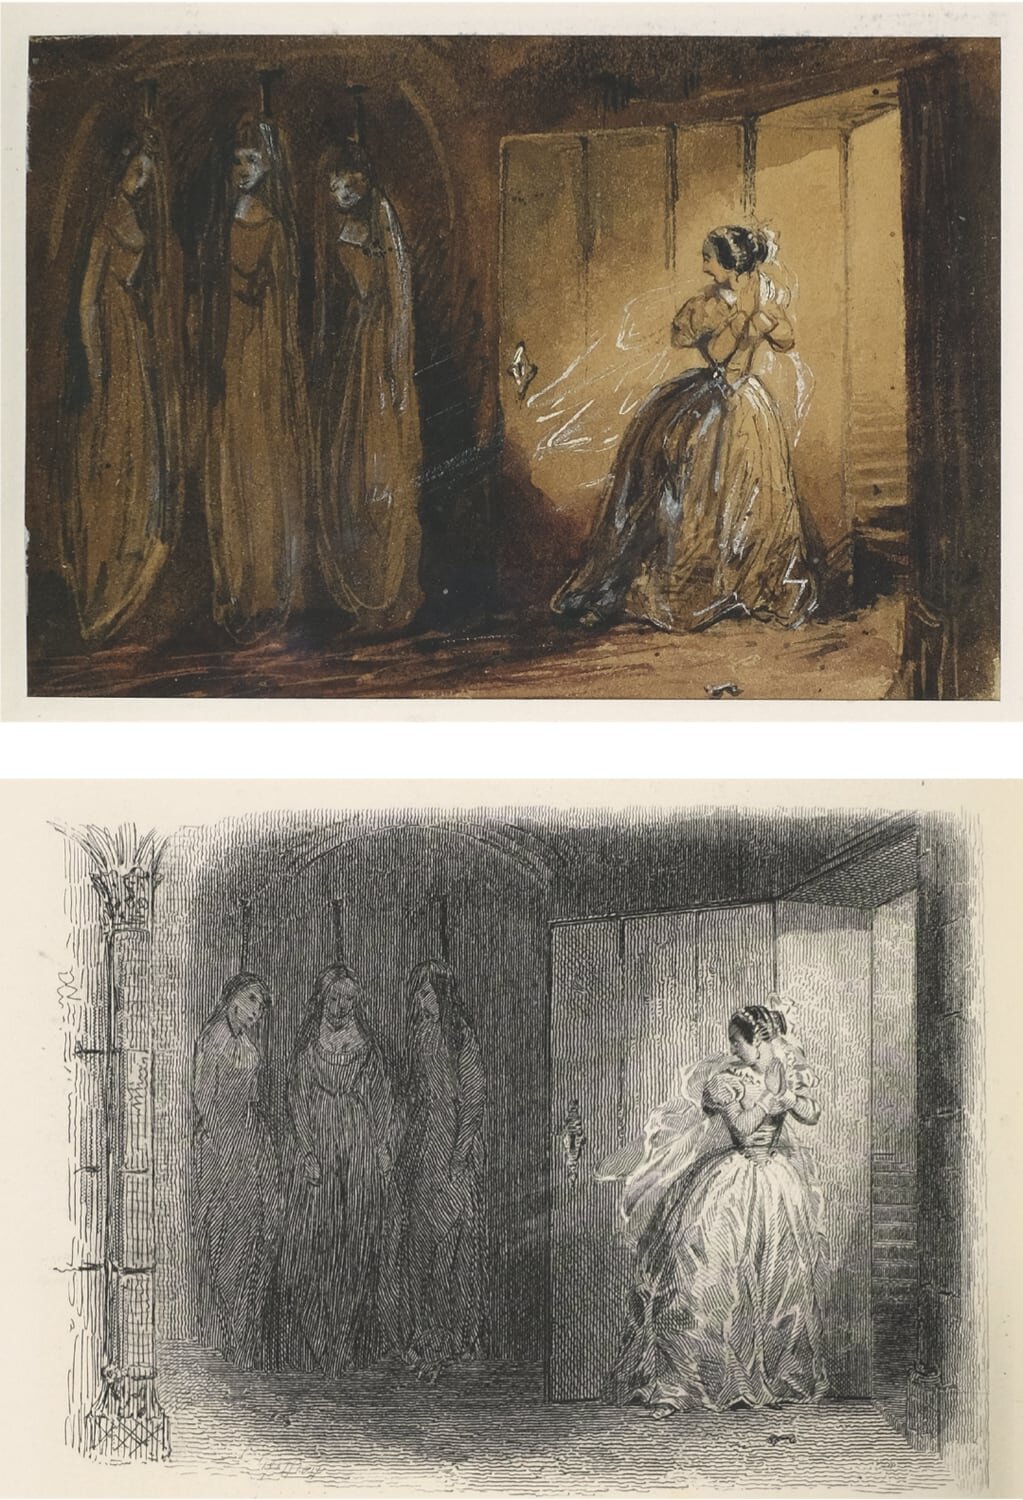  Watercolours by Hippolyte Pauquet for Charles Perrault’s Tales and Stories of the Past with Morals (Histoires ou contes du temps passé) [no. 494]. 